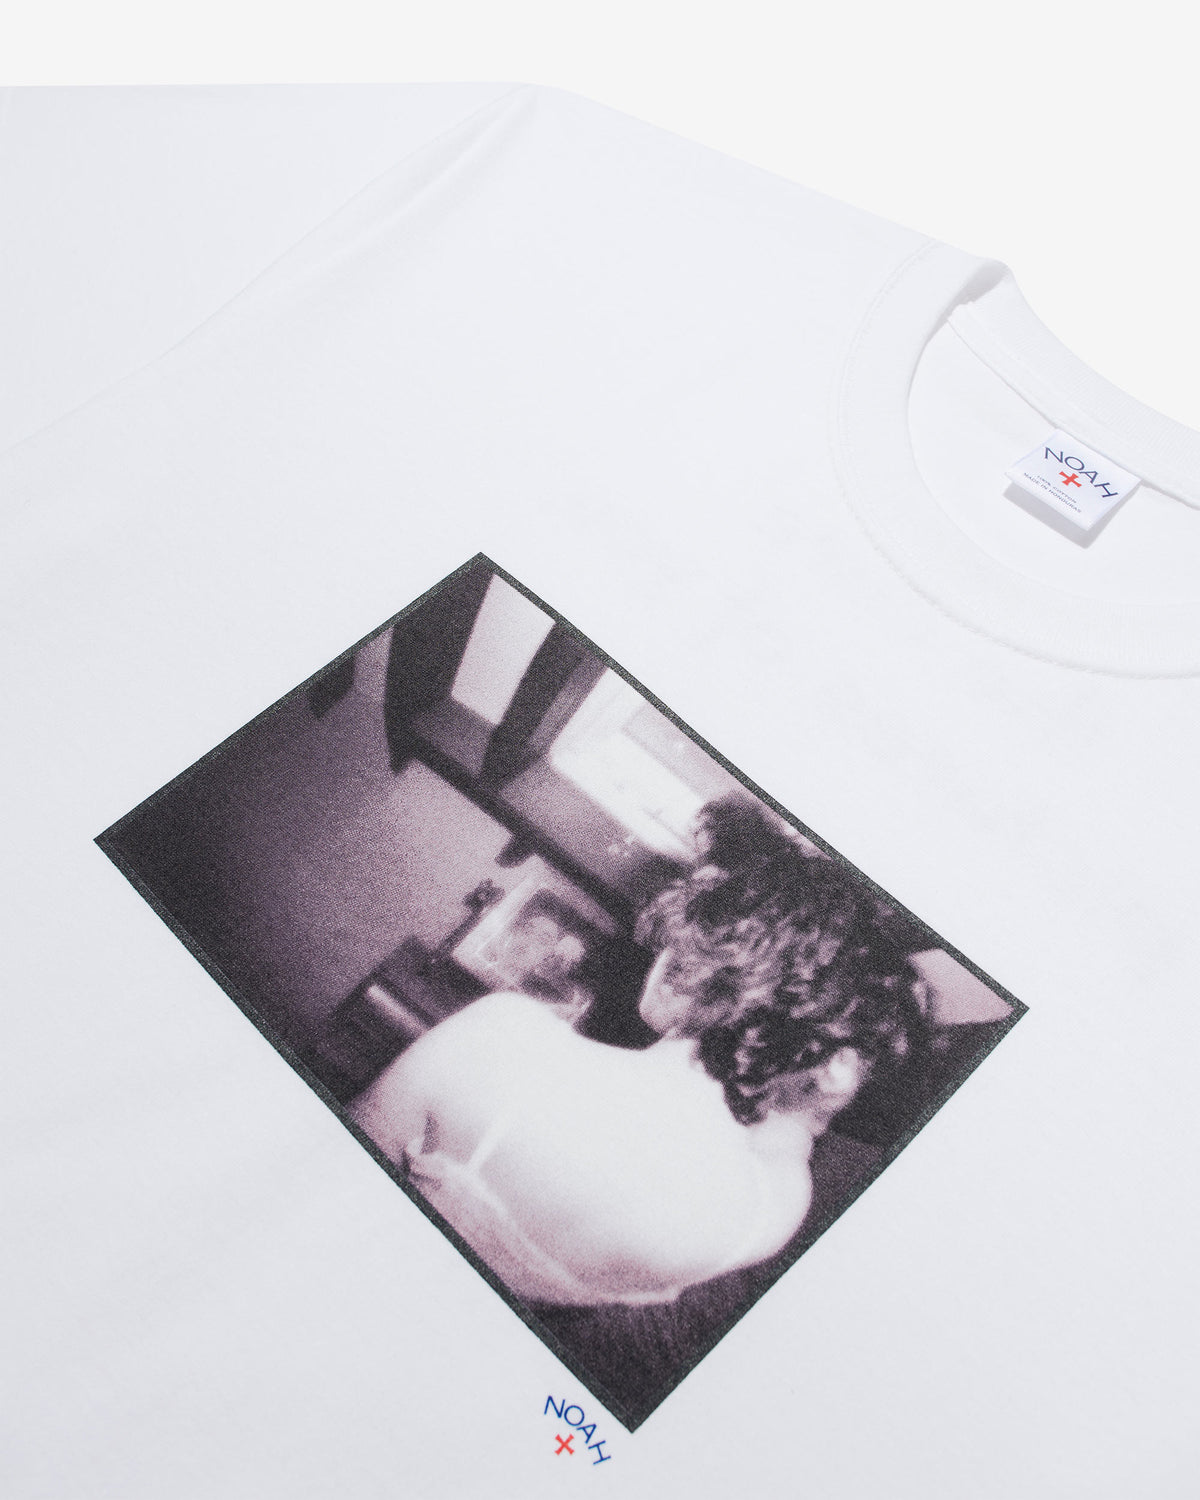 Noah x The Cure Pictures Of You Tee